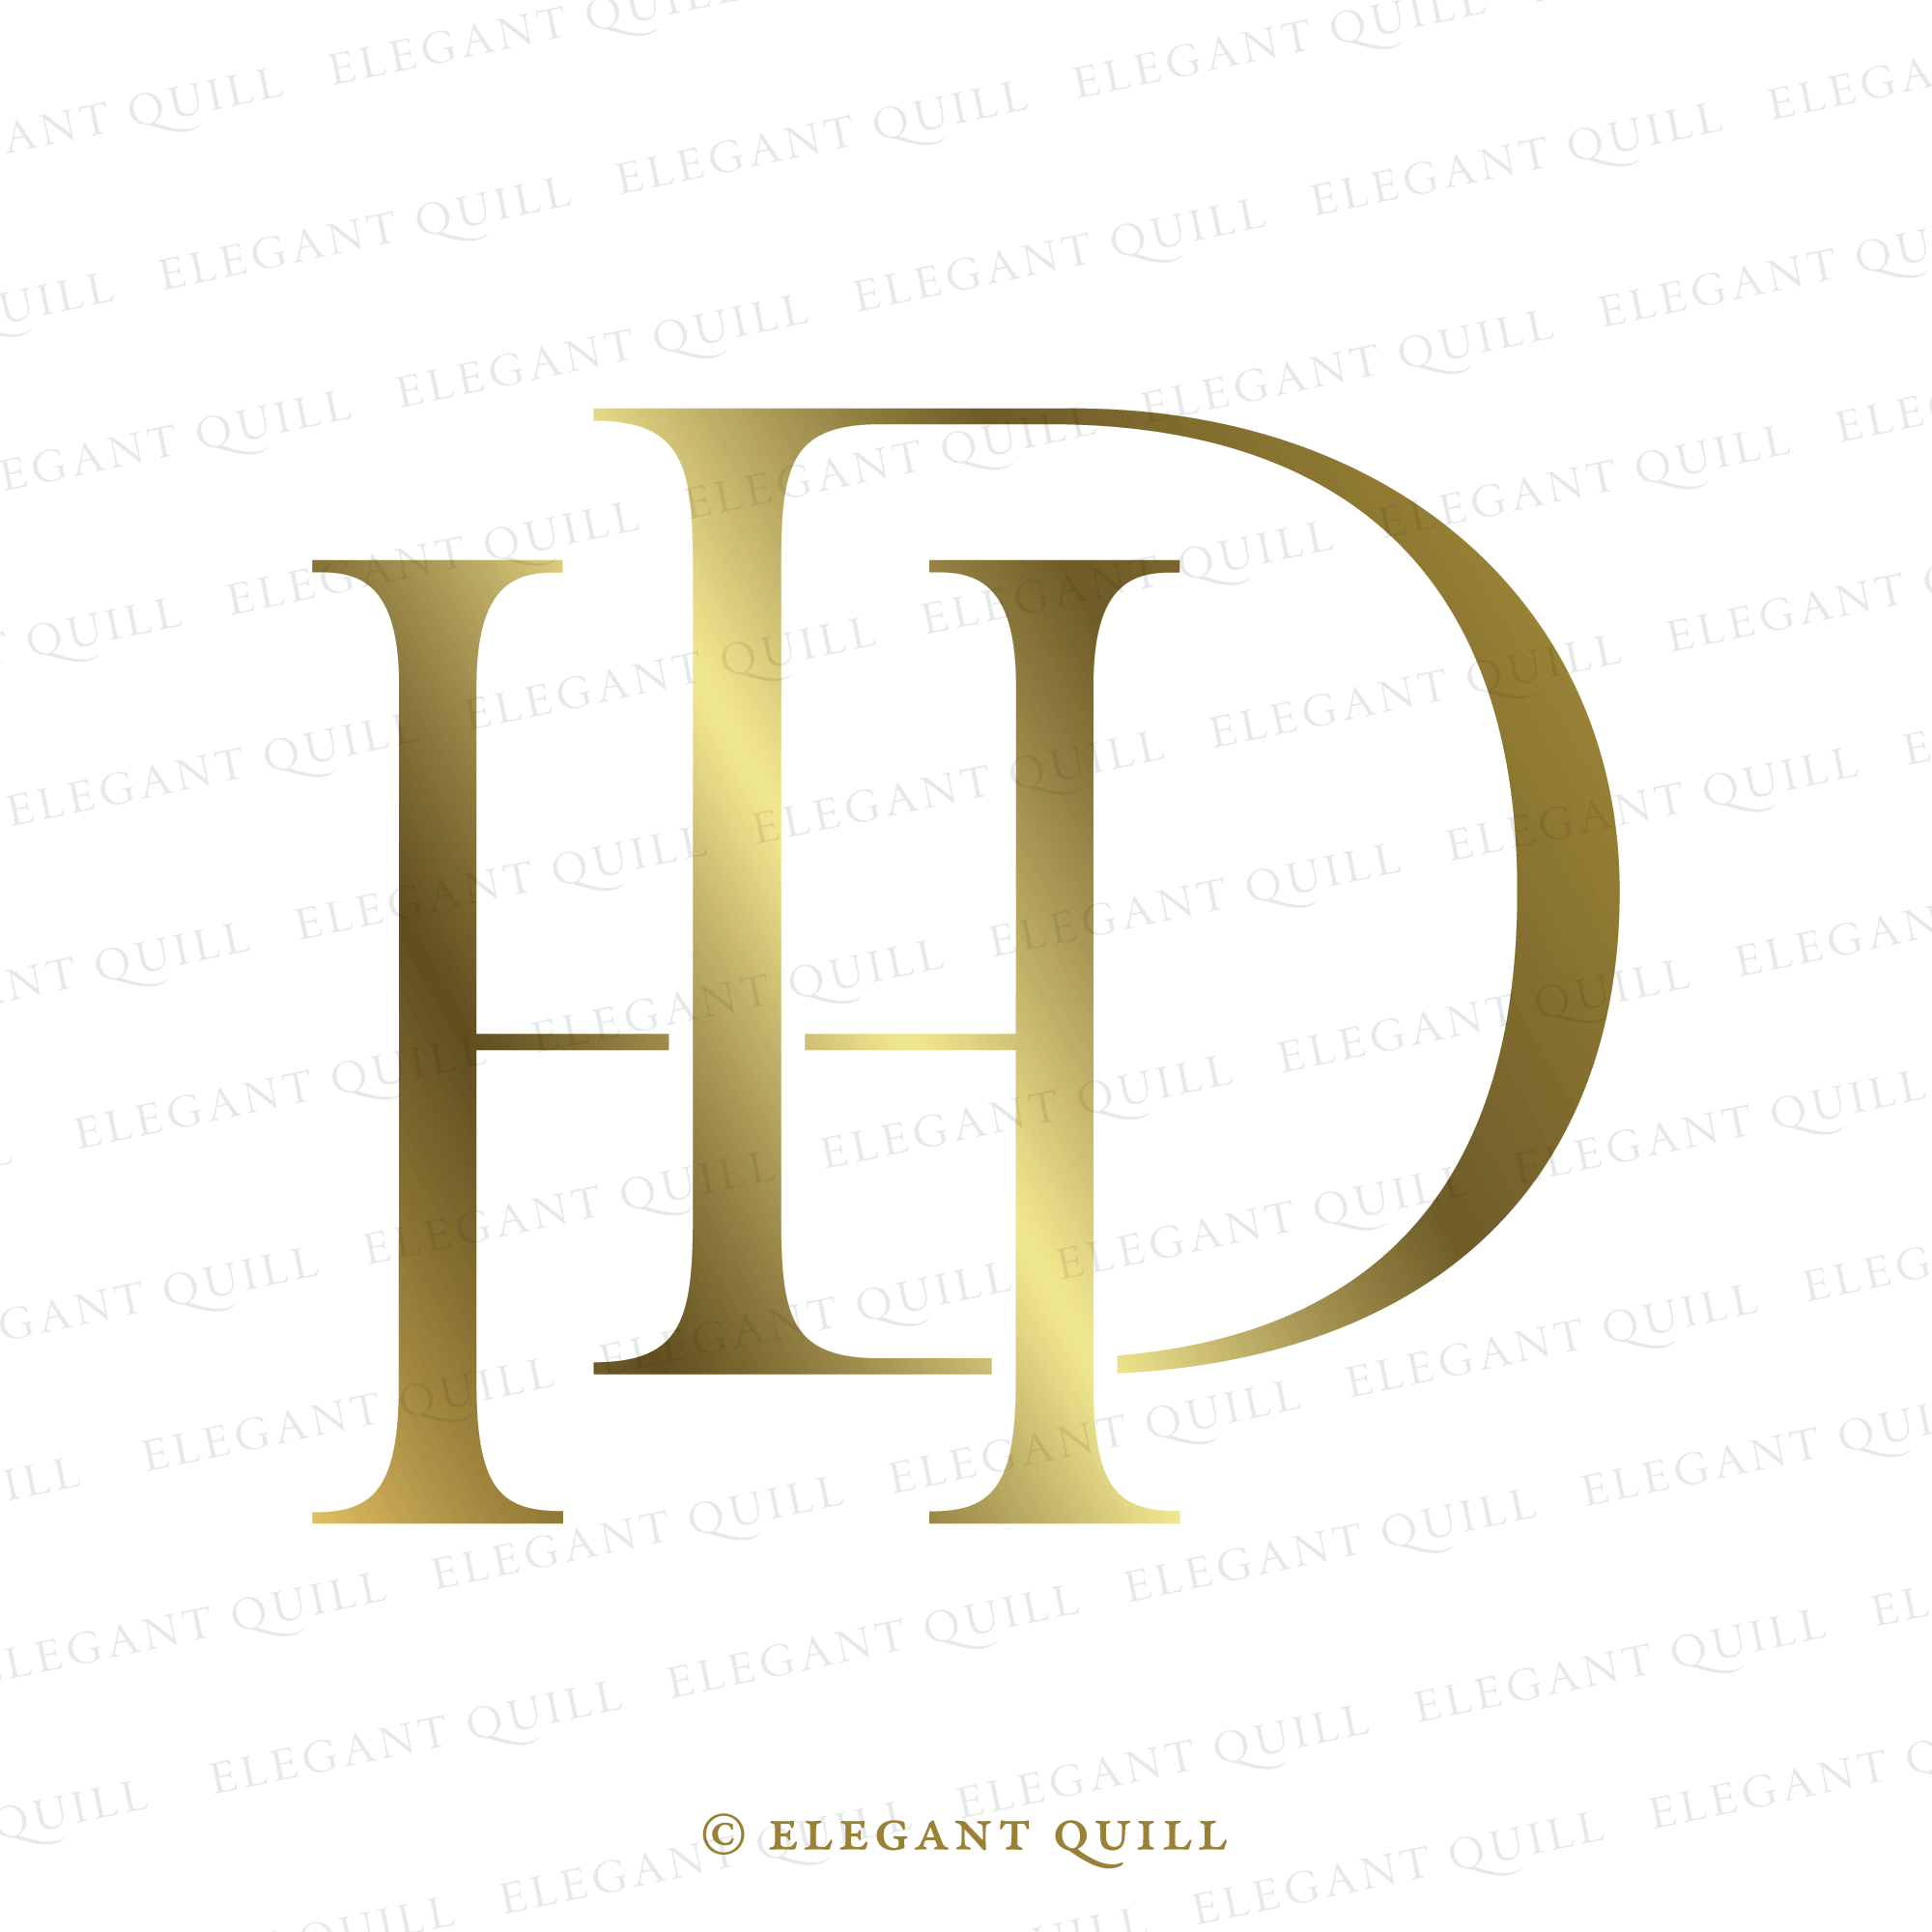 Dh Logo Stock Vector Illustration and Royalty Free Dh Logo Clipart